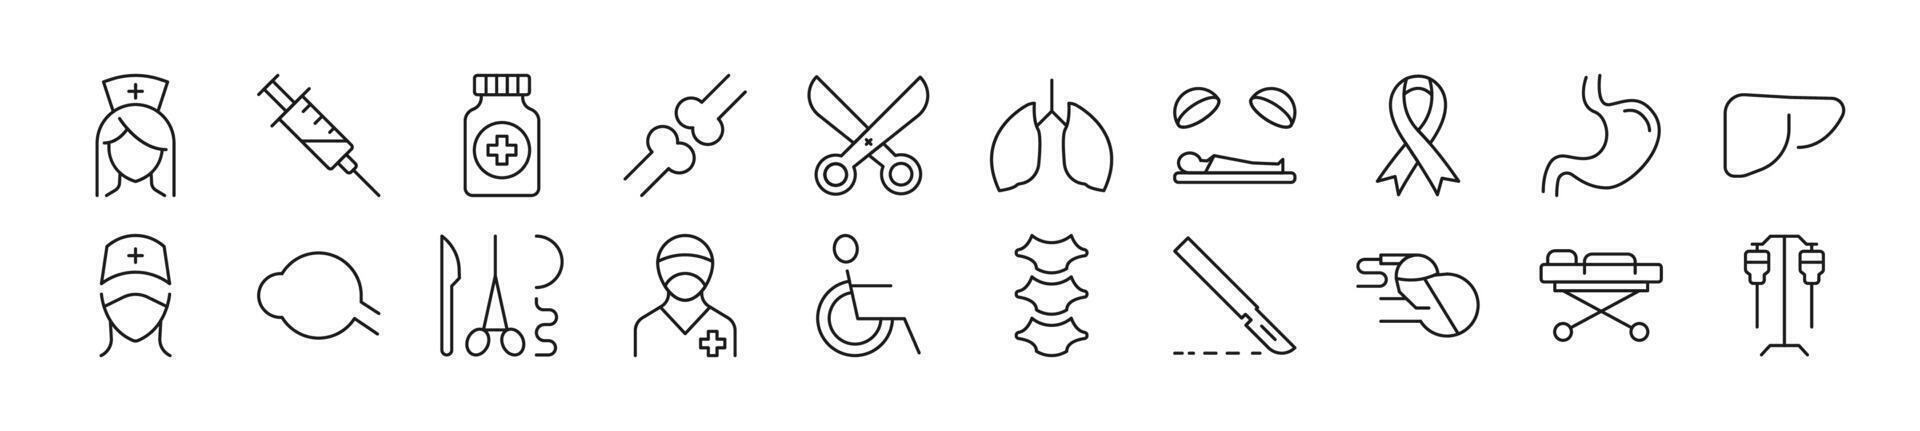 Surgeon Linear vector icons collection. Editable stroke. Simple linear illustration for web sites, newspapers, articles book